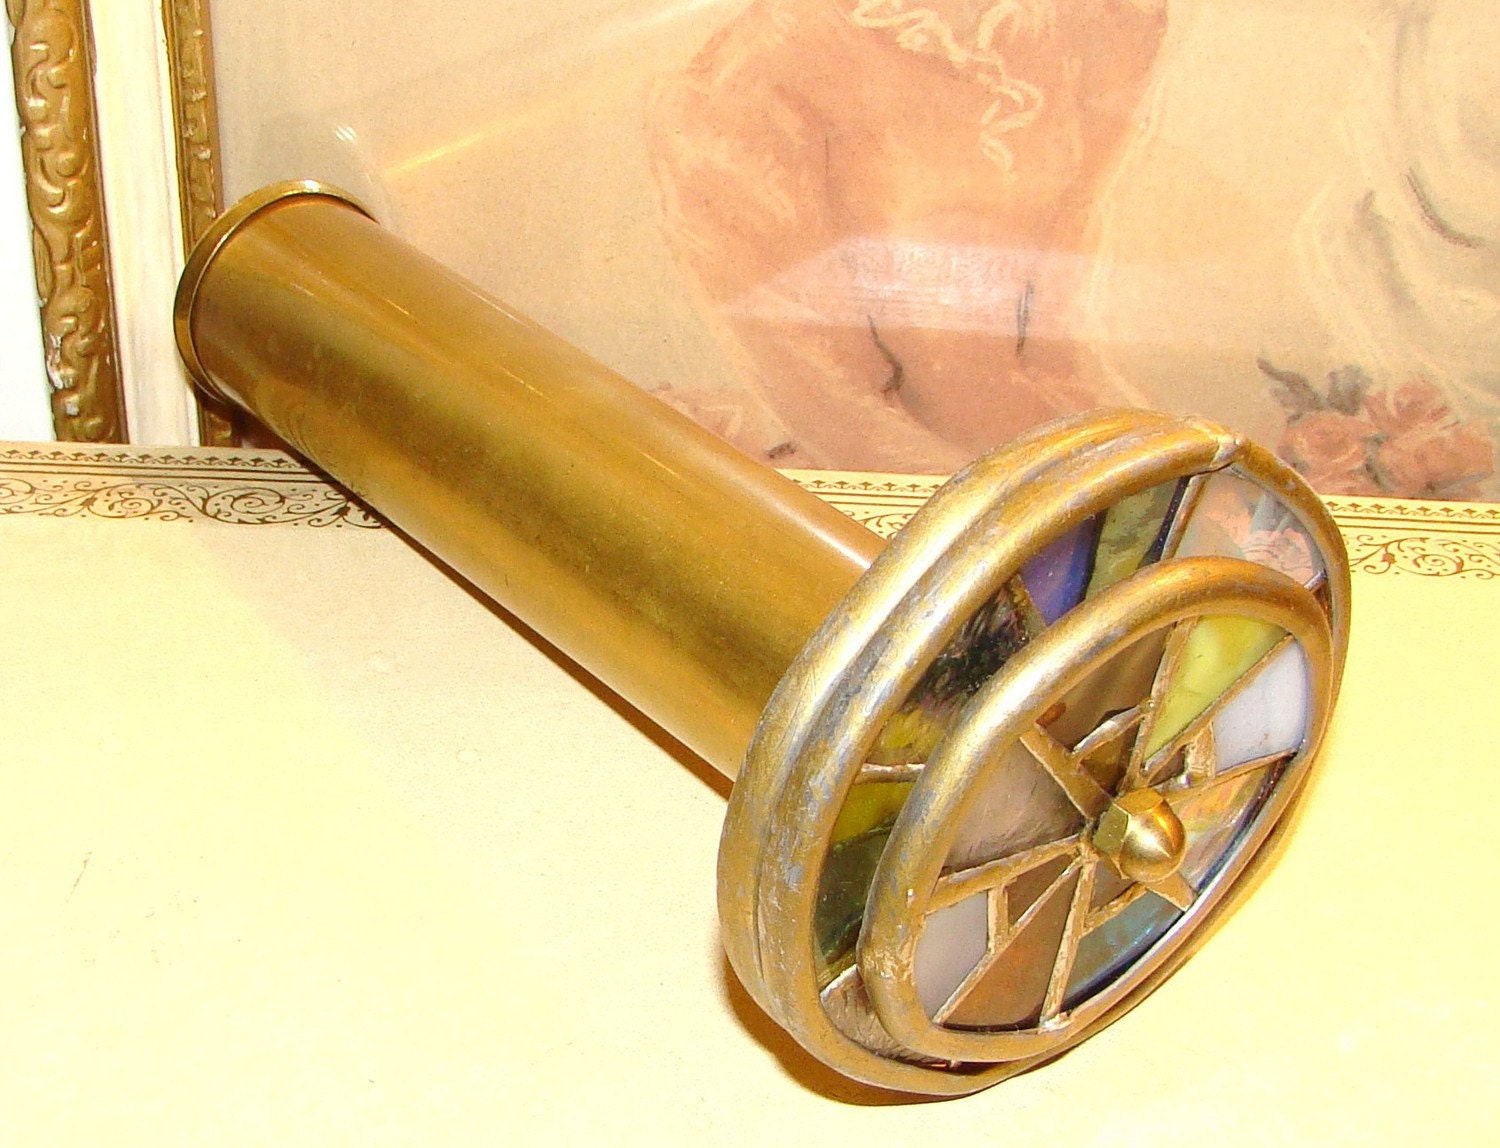 Vintage Hand Crafted Brass Kaleidoscope Toy by ...